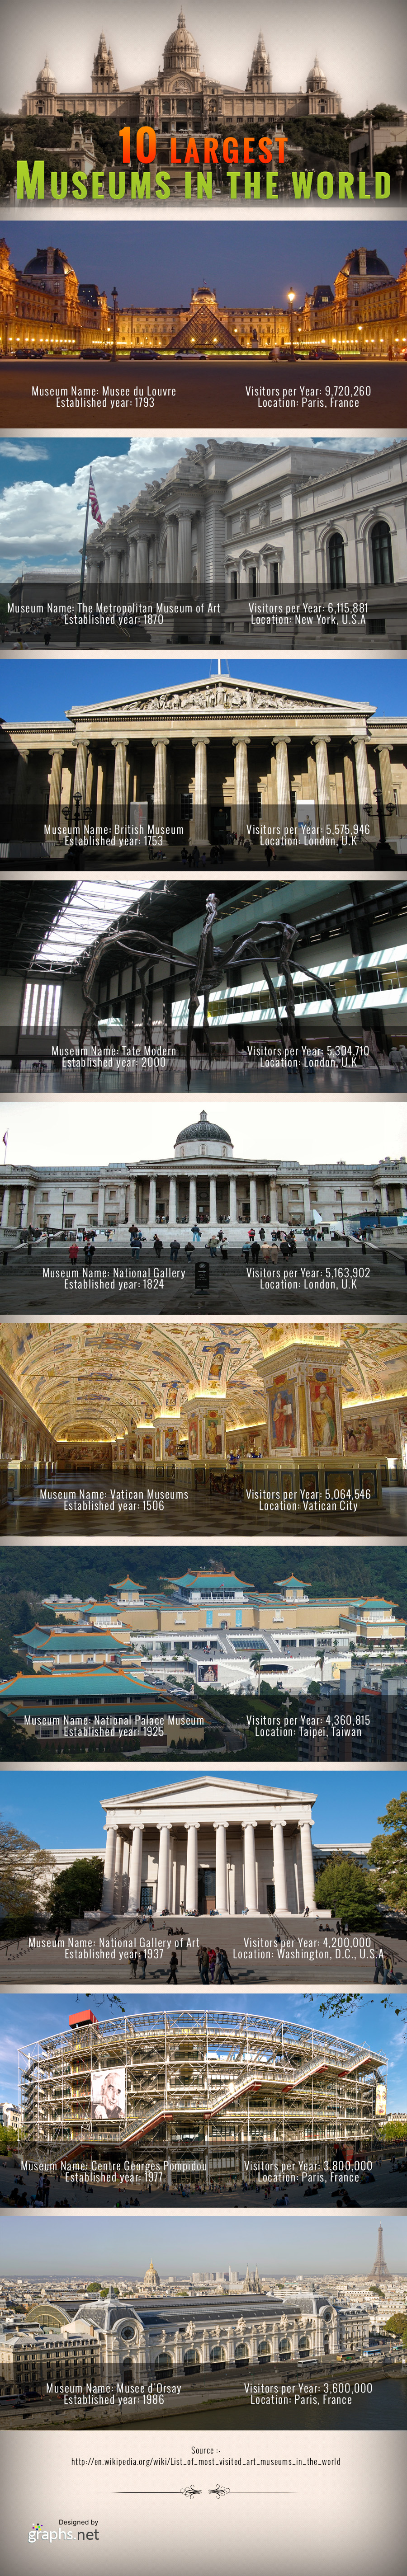 10 Largest Museums in the World